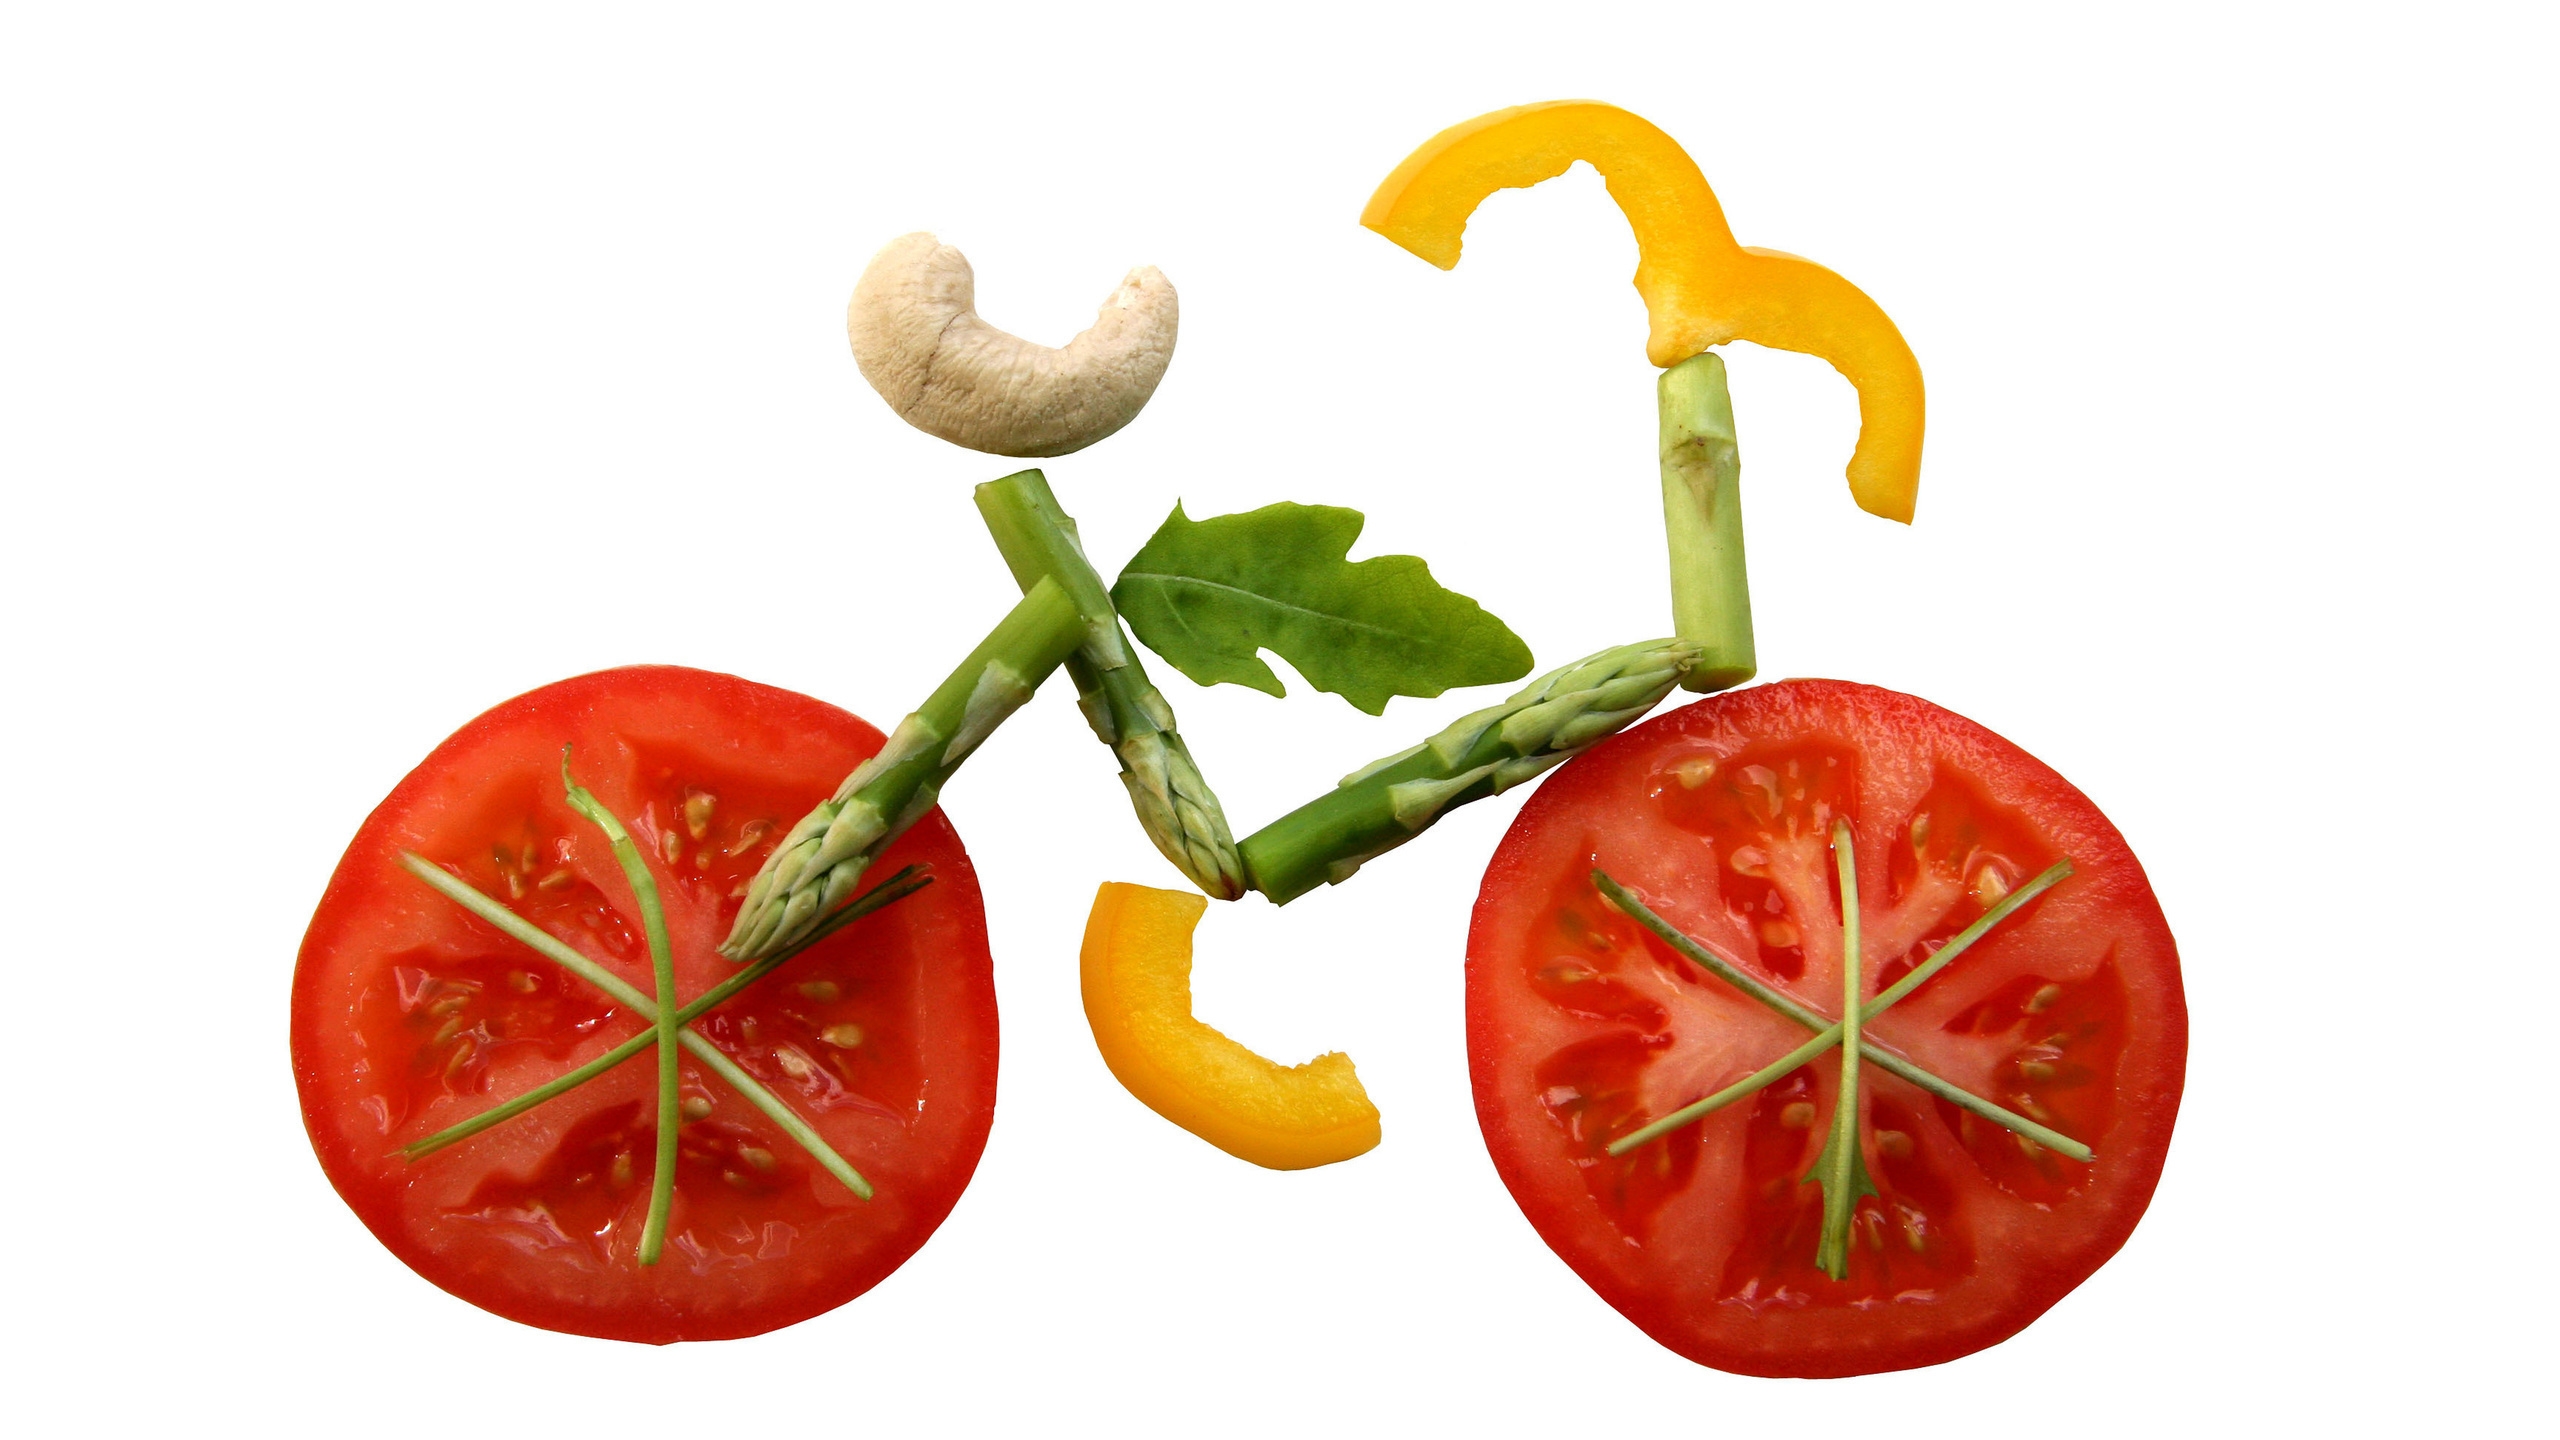 Vegie Bicycle for 2560x1440 HDTV resolution